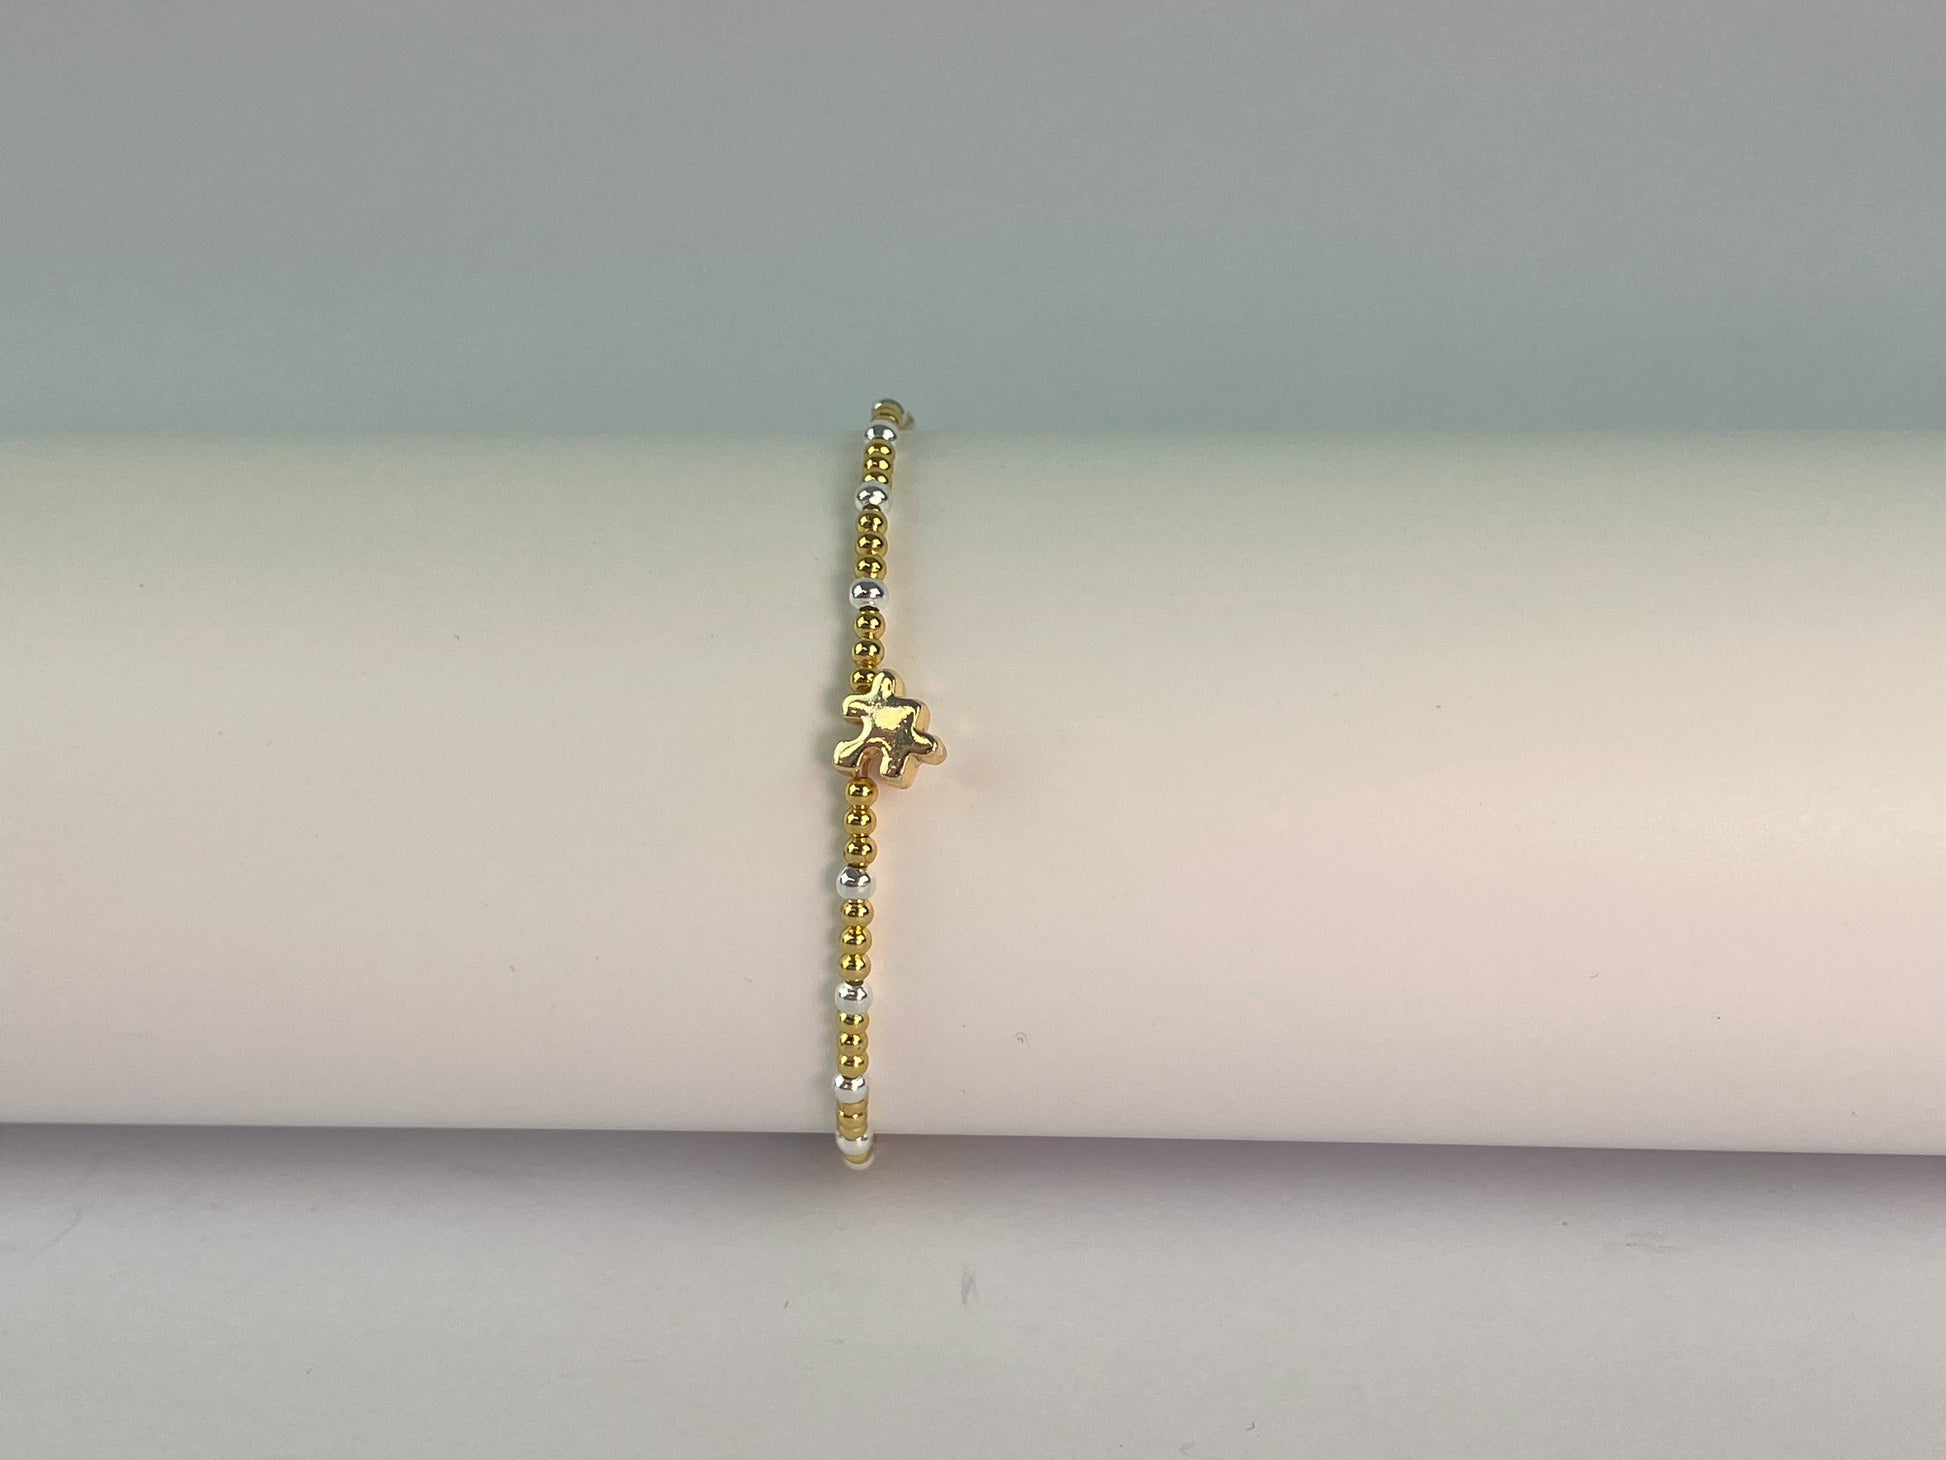 an elasticated gold and silver plated beaded bracelet with a jigsaw charm showing gold plated side